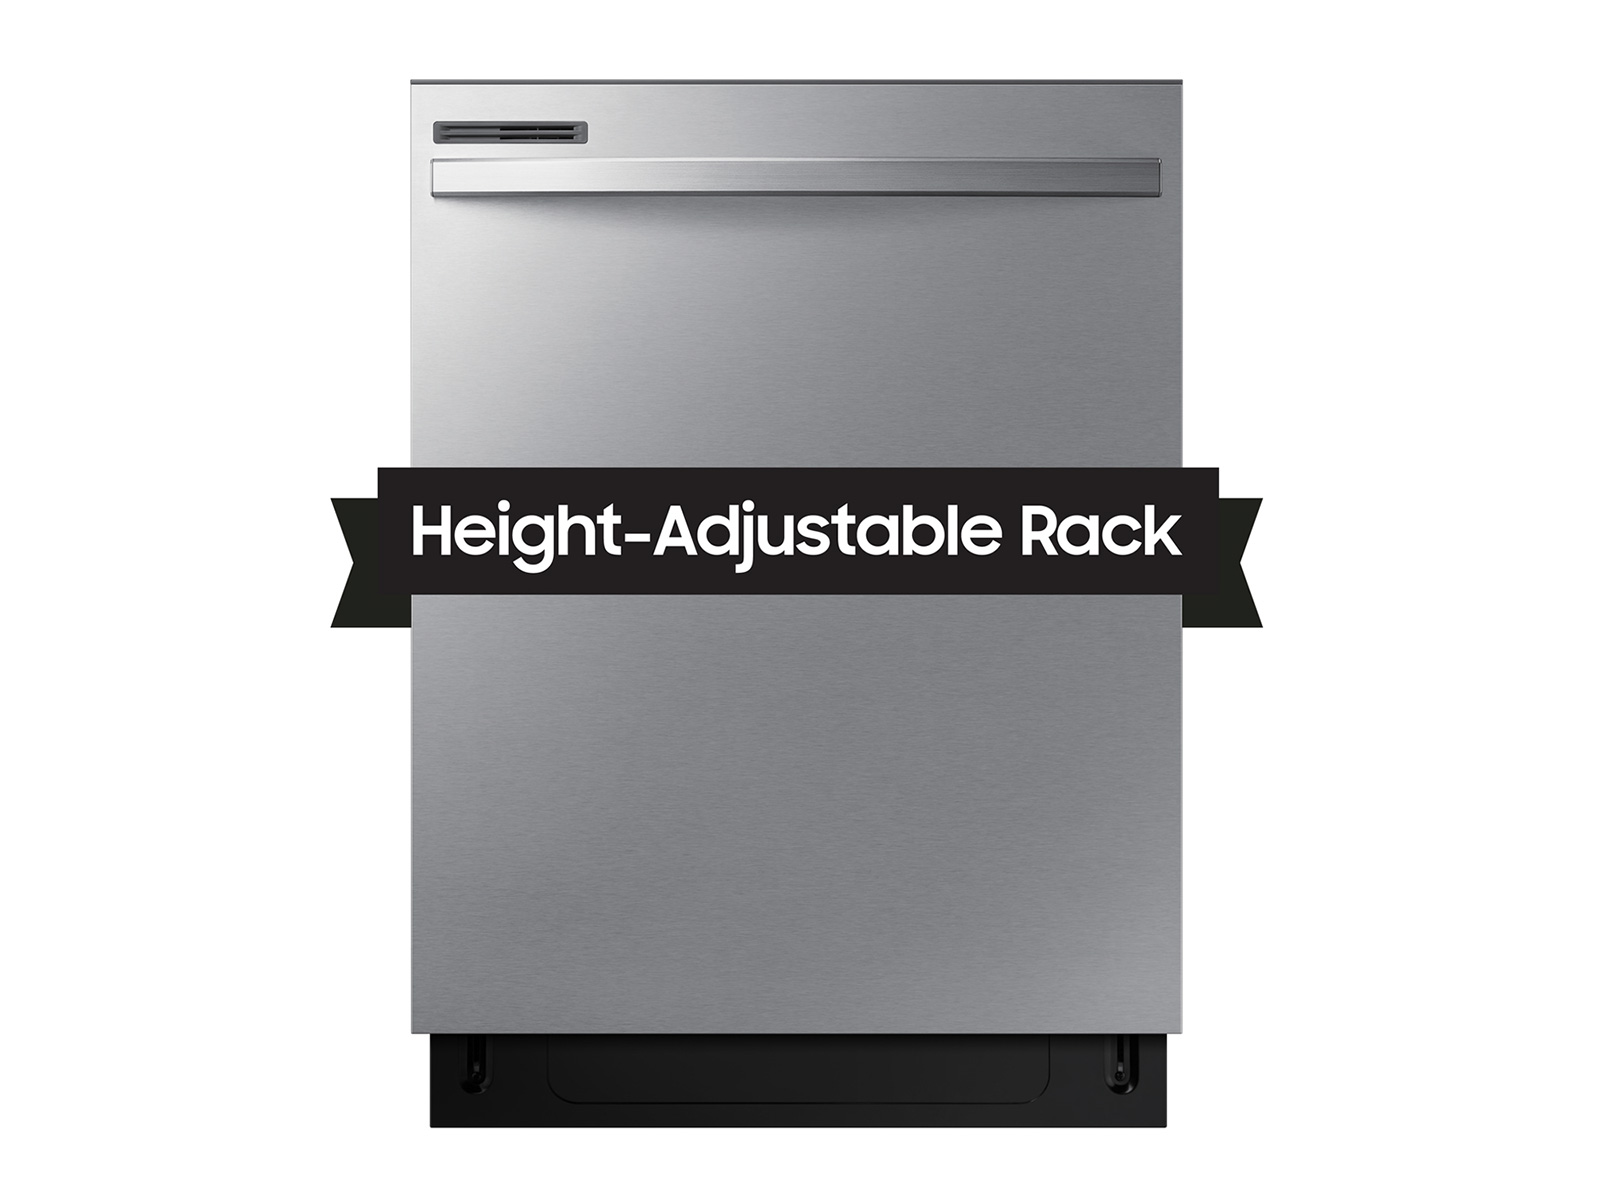 Thumbnail image of Fingerprint Resistant 53 dBA Dishwasher with Height-Adjustable Rack in Stainless Steel